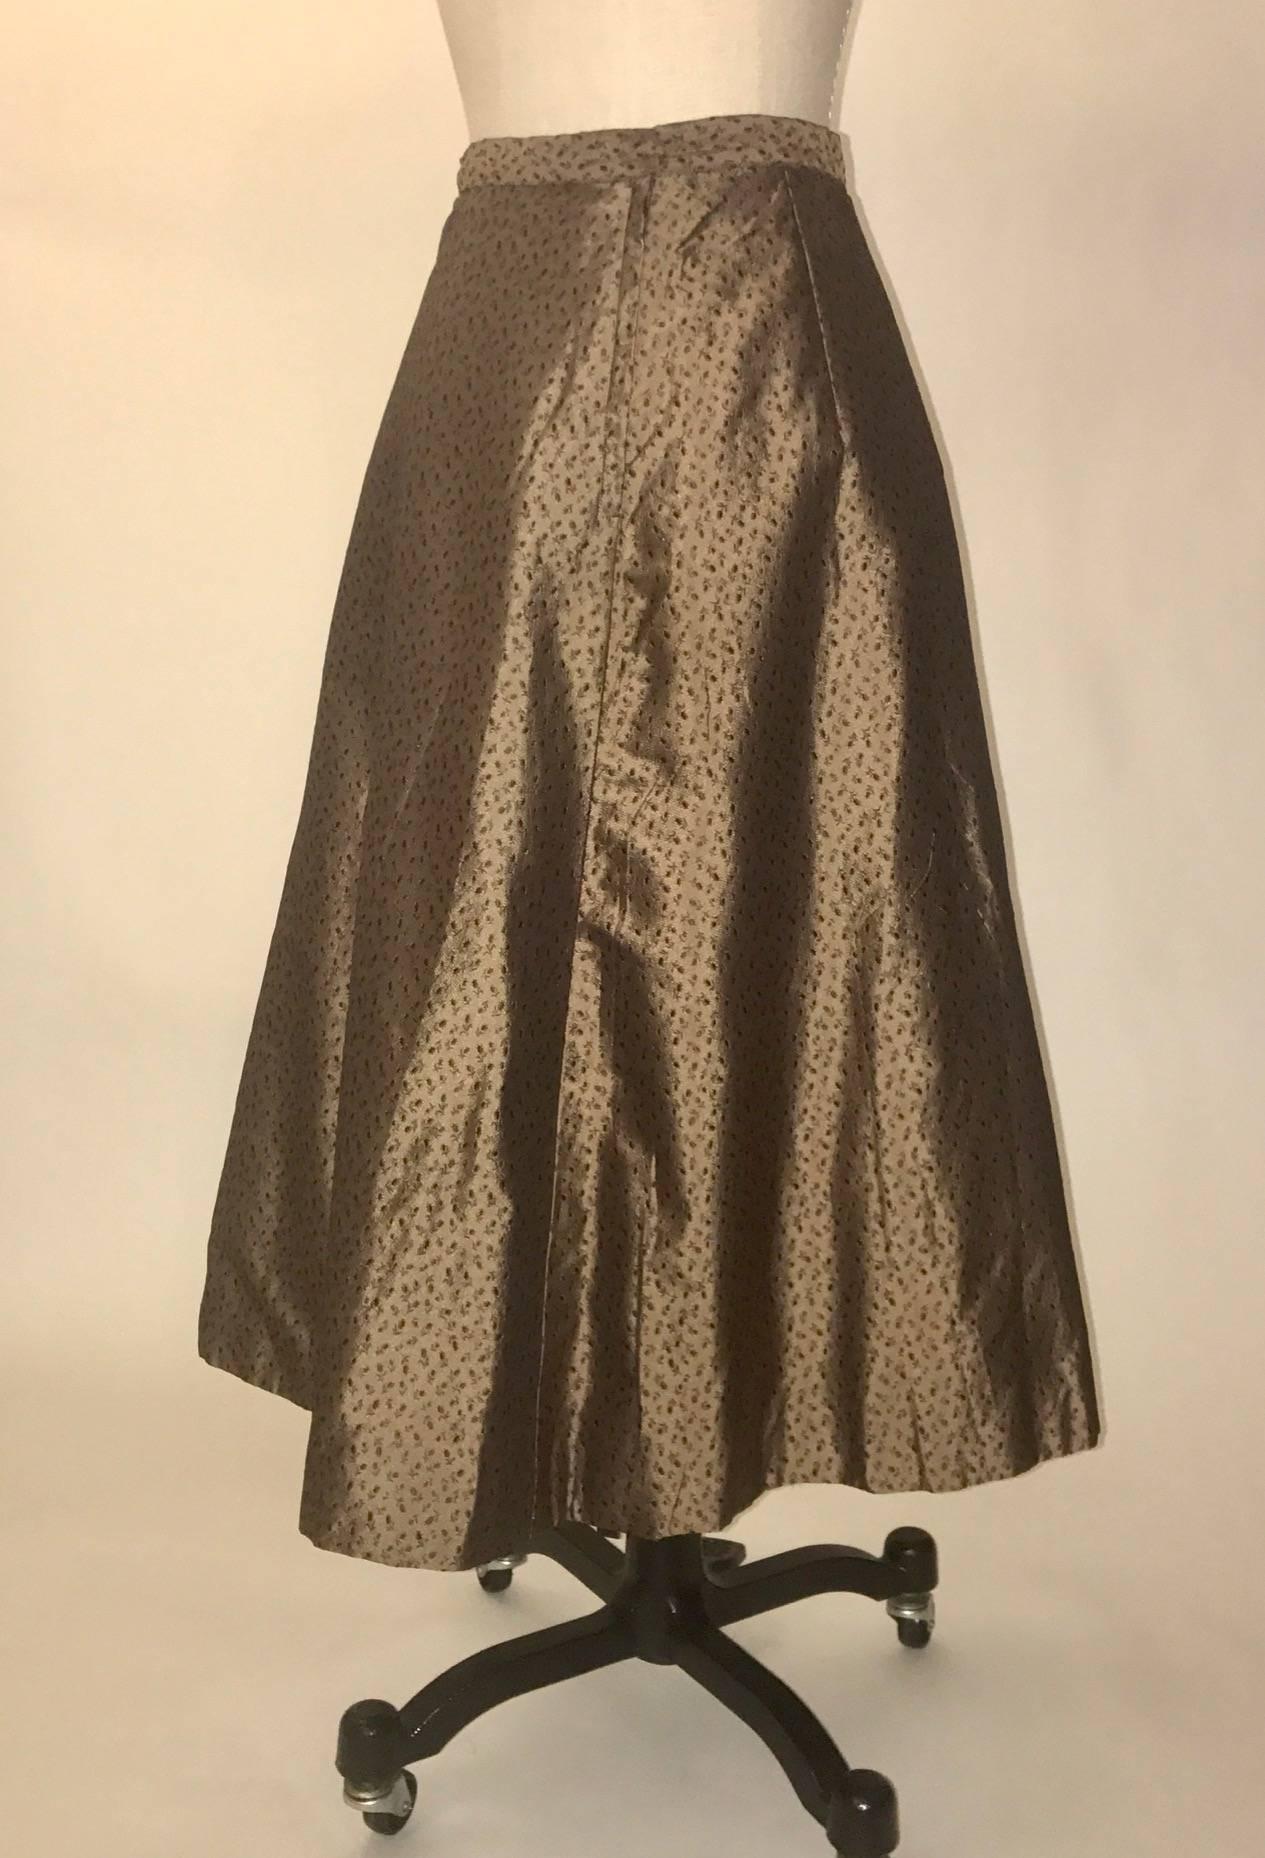 Jean Desses by IM Bagedonow Floral Skirt Suit, 1950s American Collection  In Fair Condition For Sale In San Francisco, CA